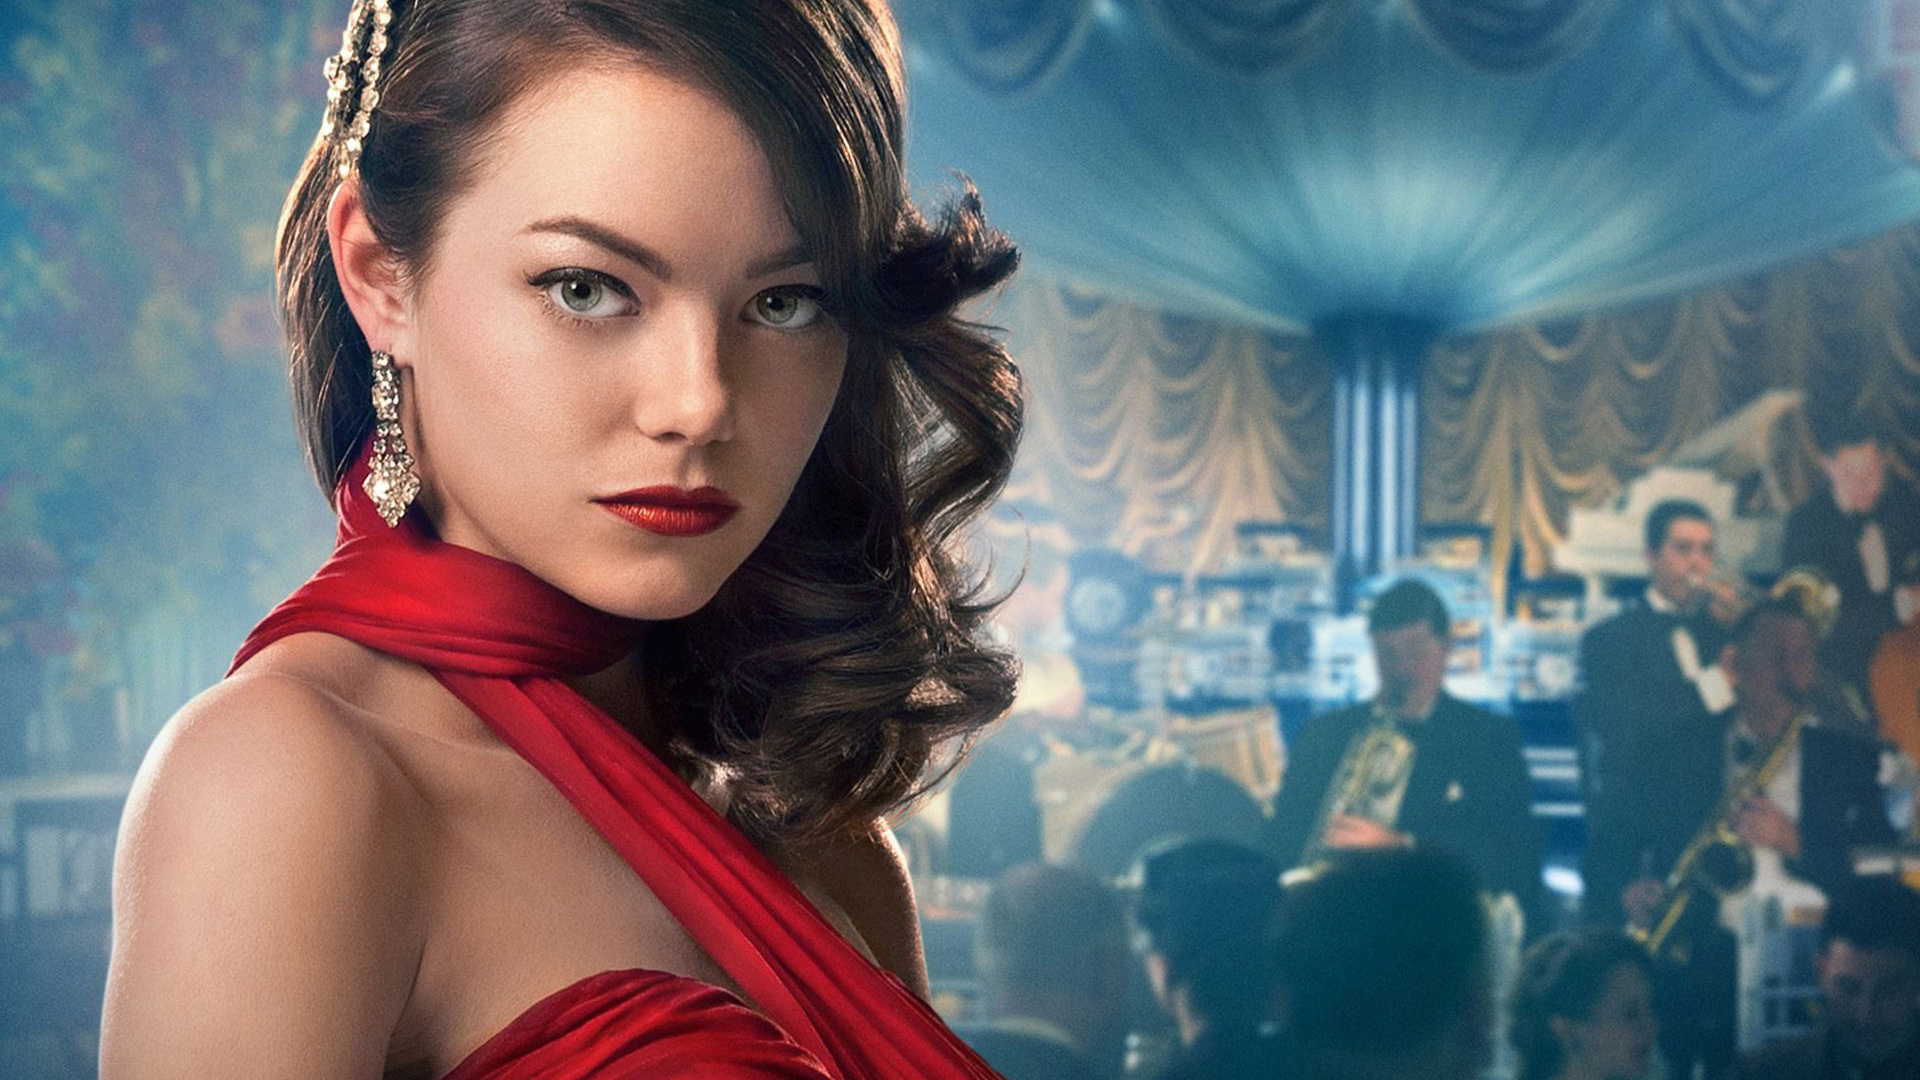 Wallpaper Emma Stone in Gangster Squad movie